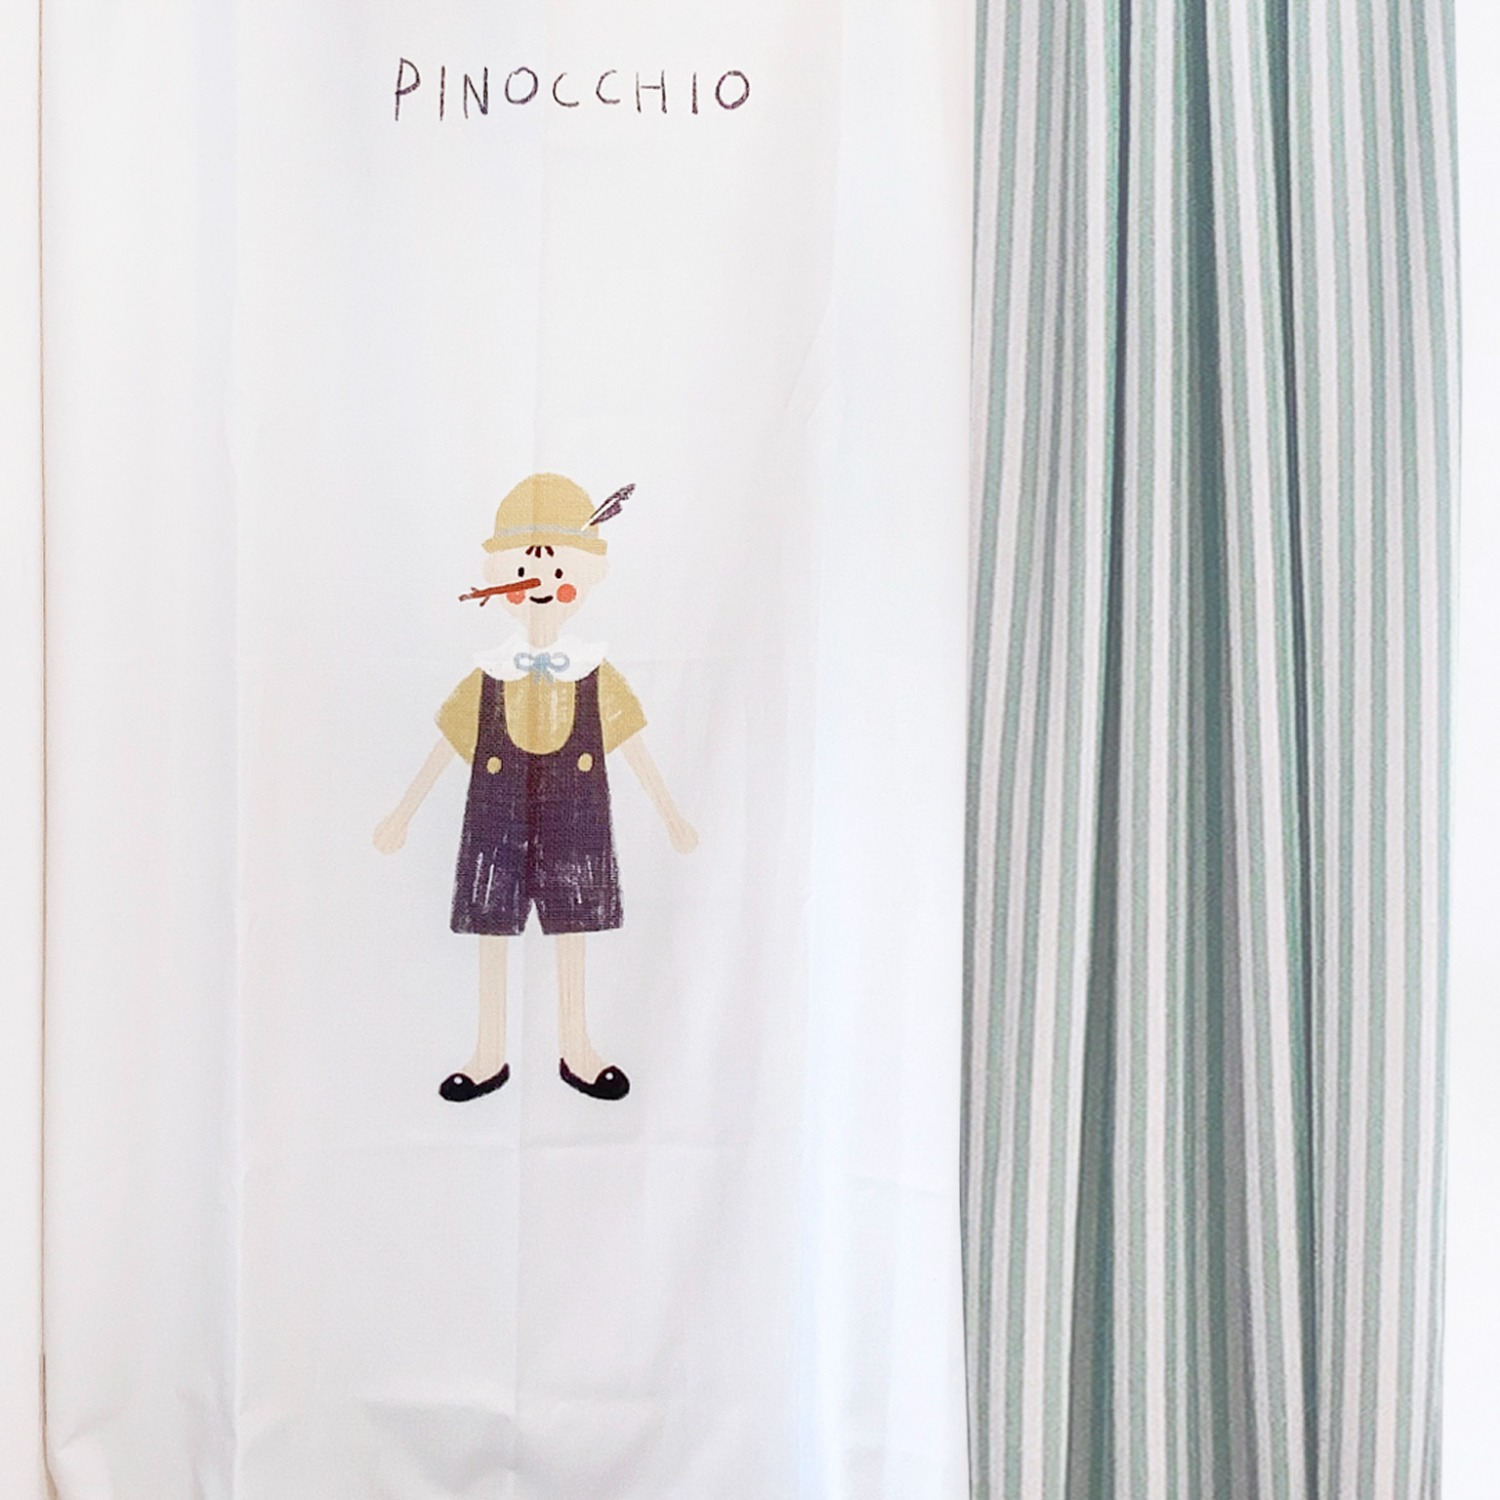 [drawing AMY] Pinocchio Curtain